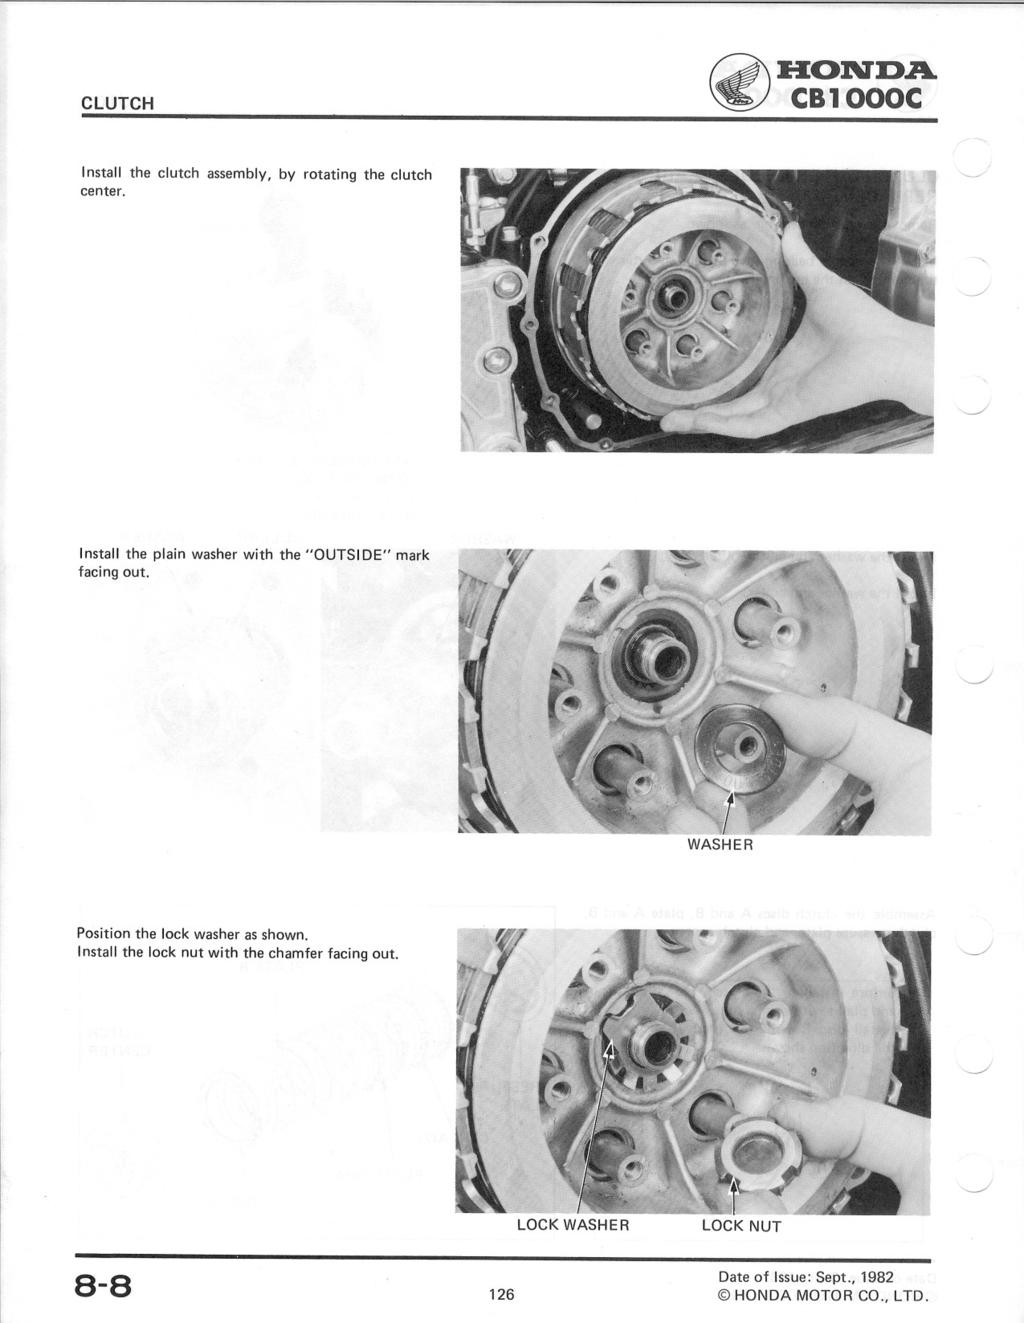 ~ :H:OlVD.A. CB1000C Install the clutch assembly, by rotating the clutch center.